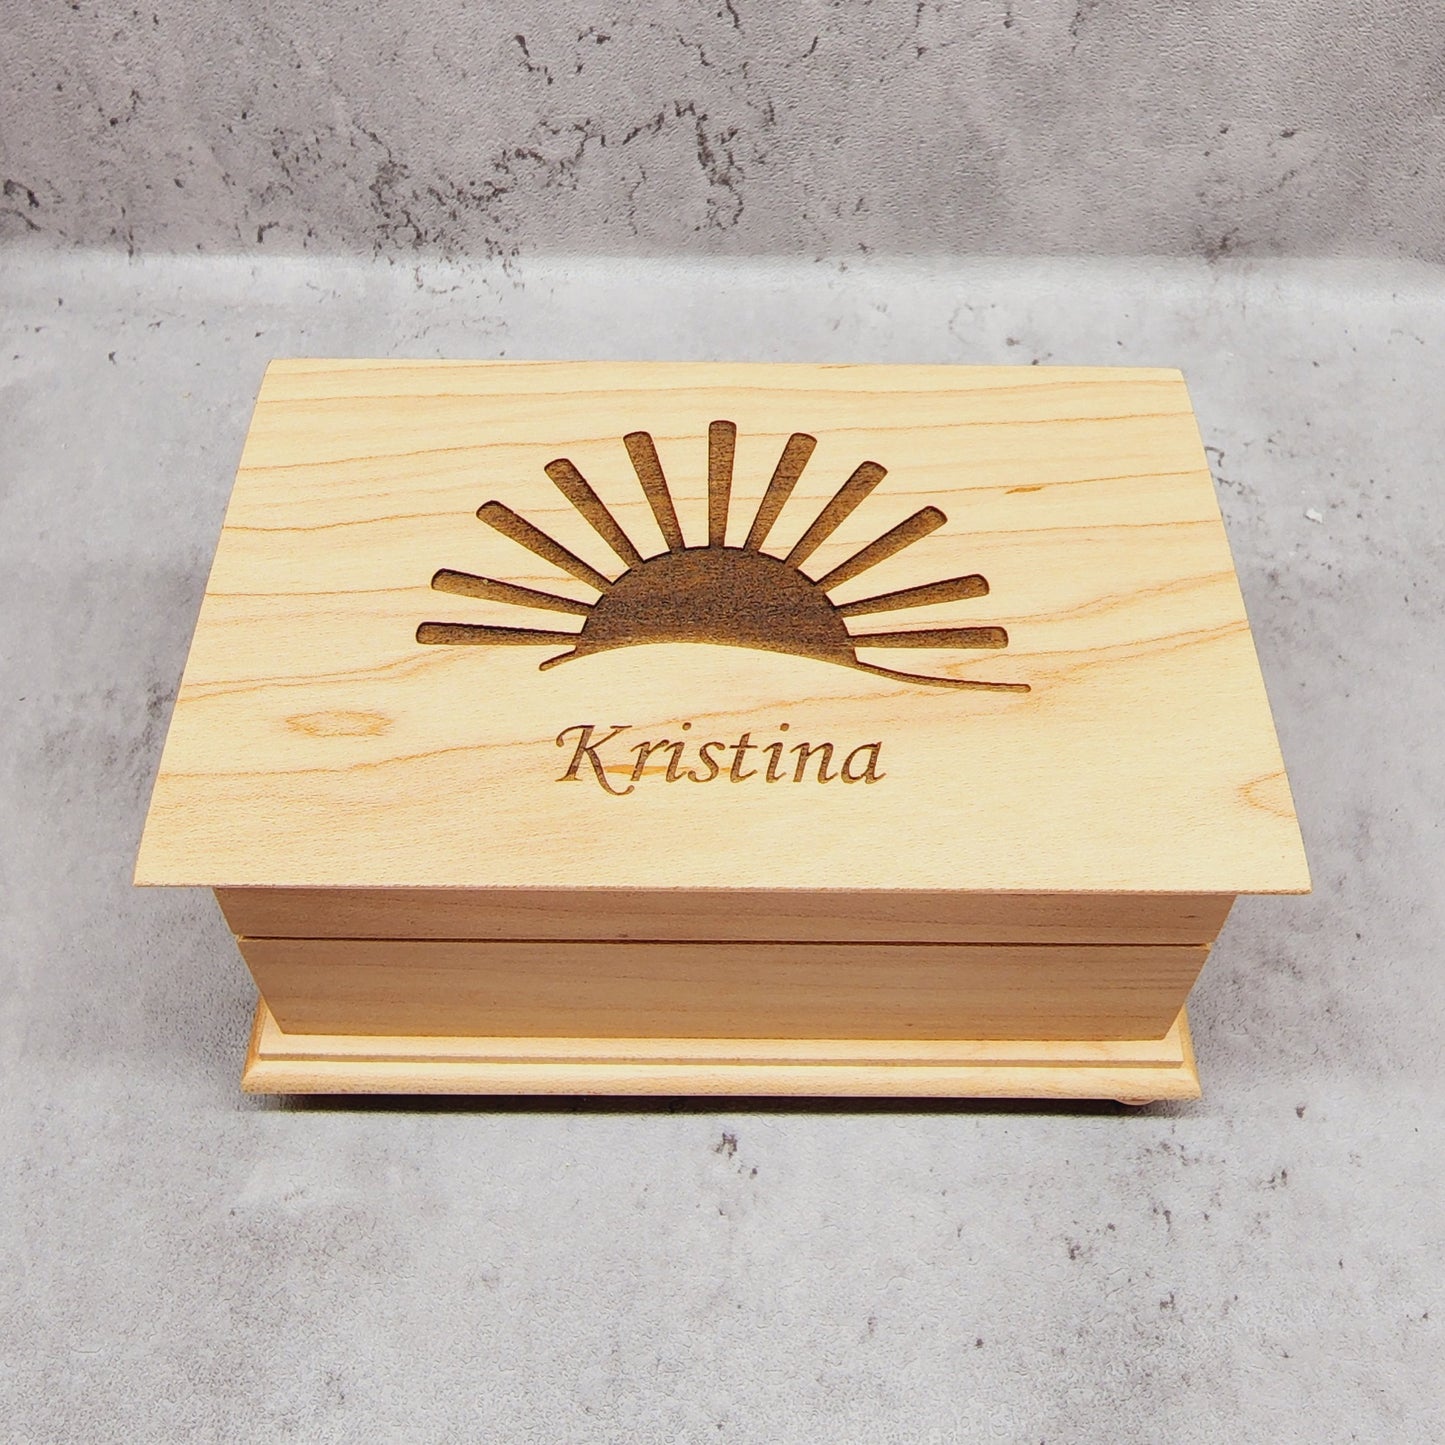 wooden jewelry box with sun and name engraving on top